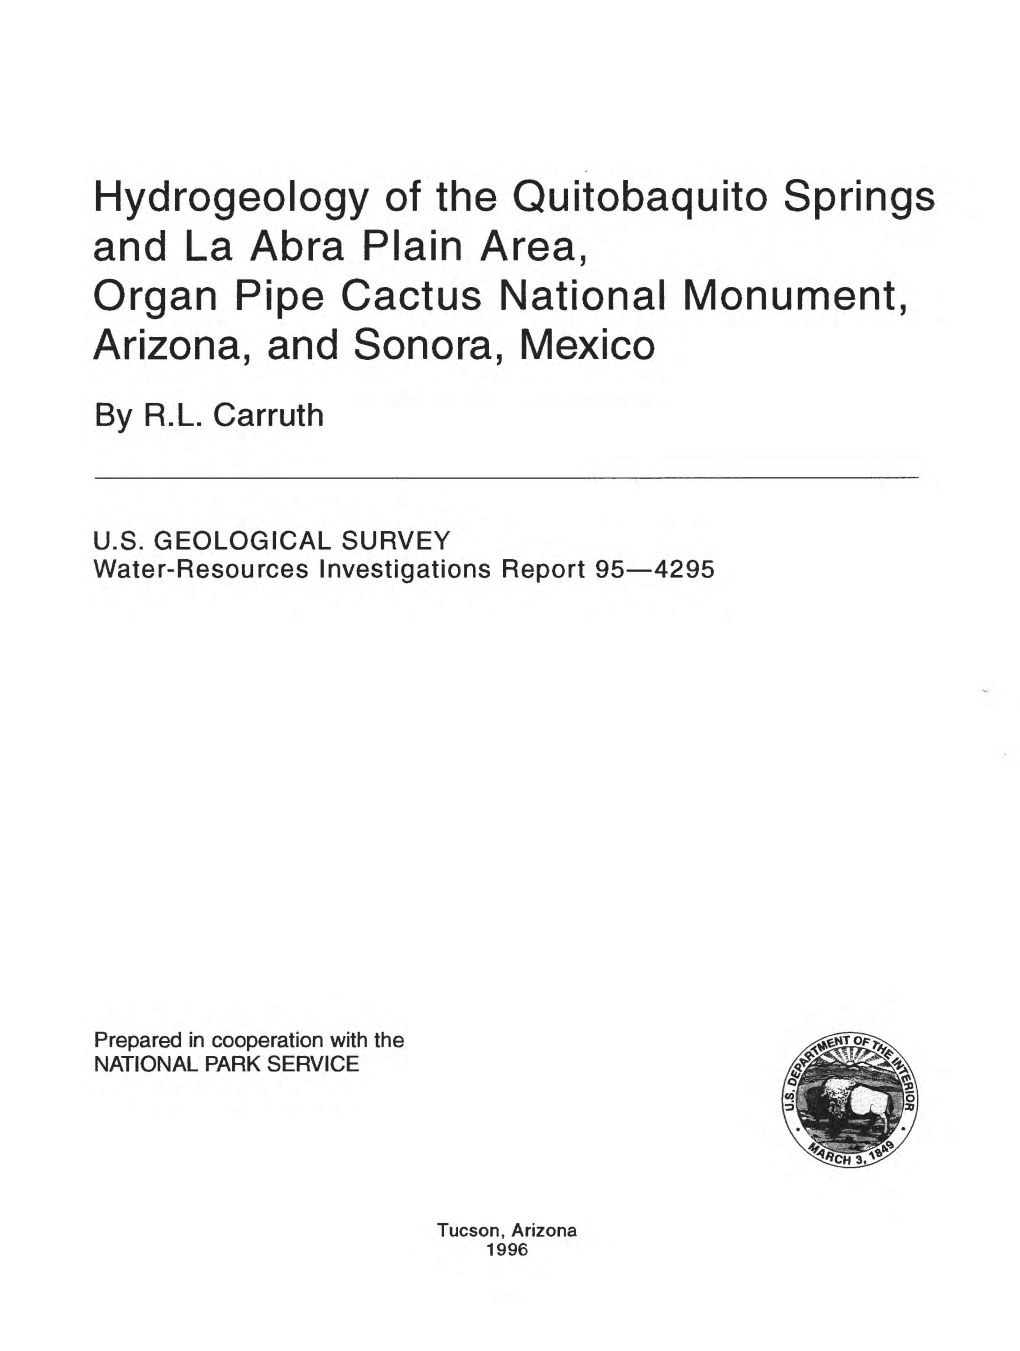 Hydrogeology of the Quitobaquito Springs and La Abra Plain Area, Organ Pipe Cactus National Monument, Arizona, and Sonora, Mexico